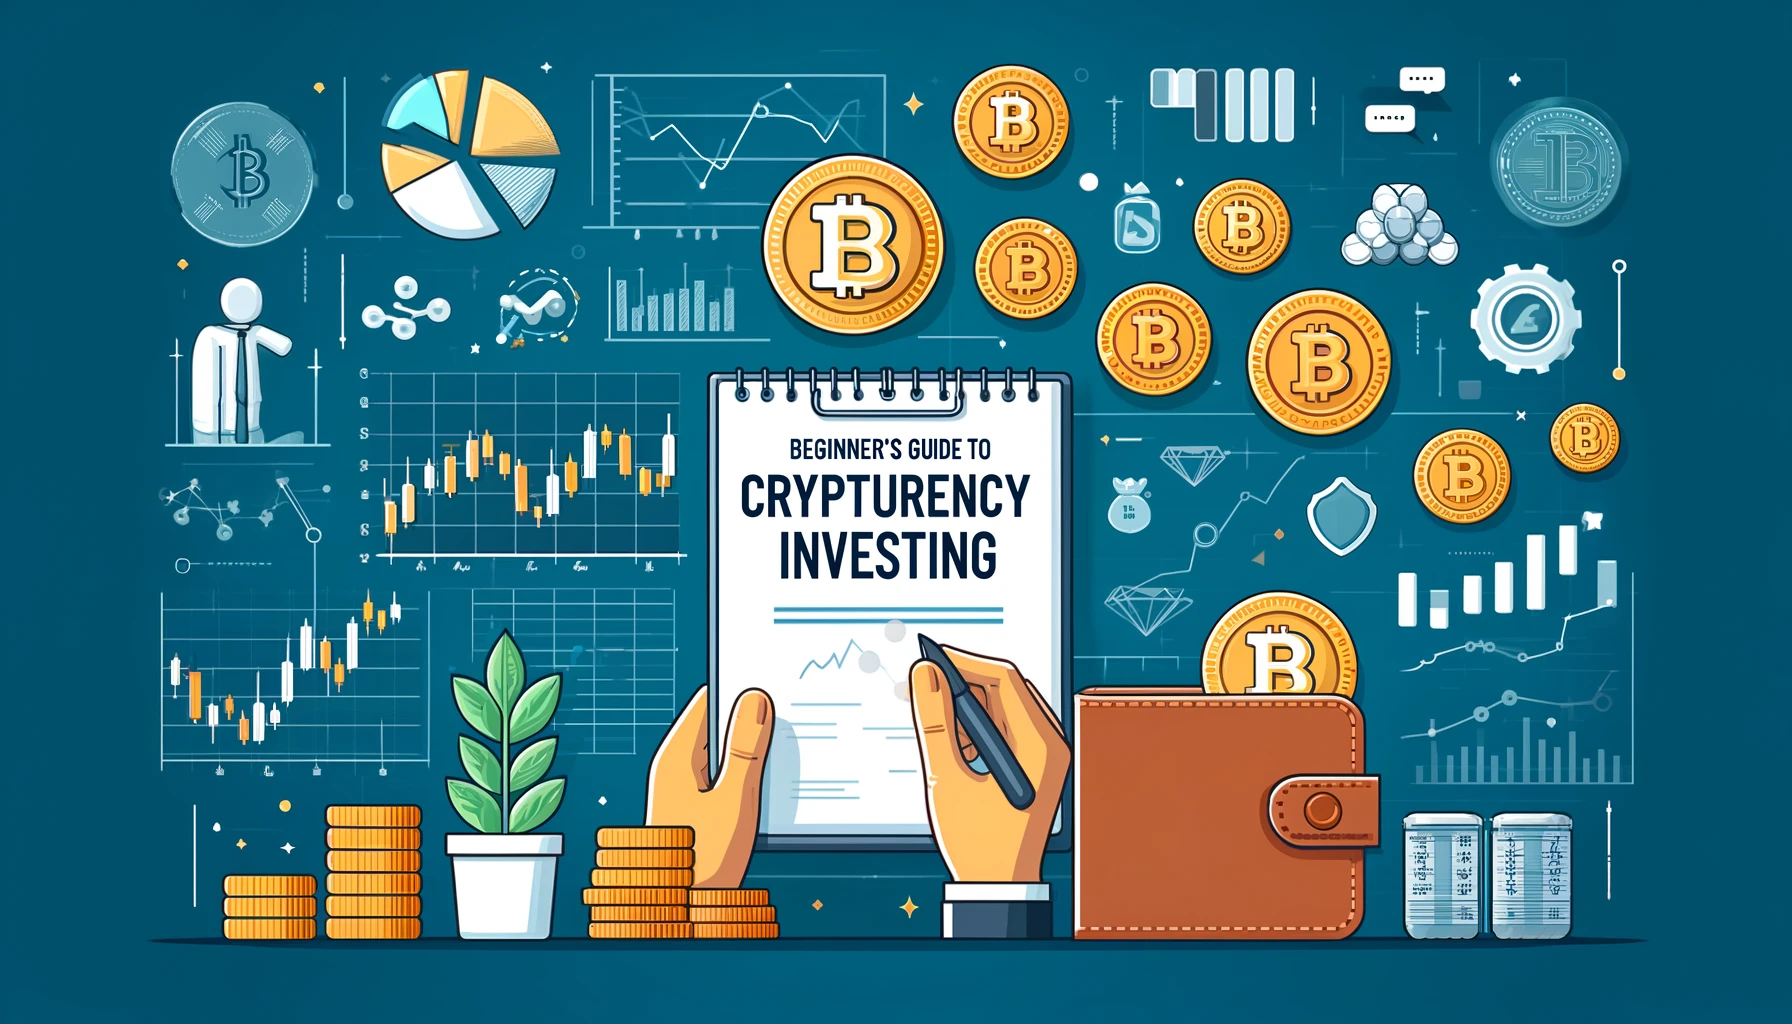 Beginner’s Guide to Cryptocurrency Investing